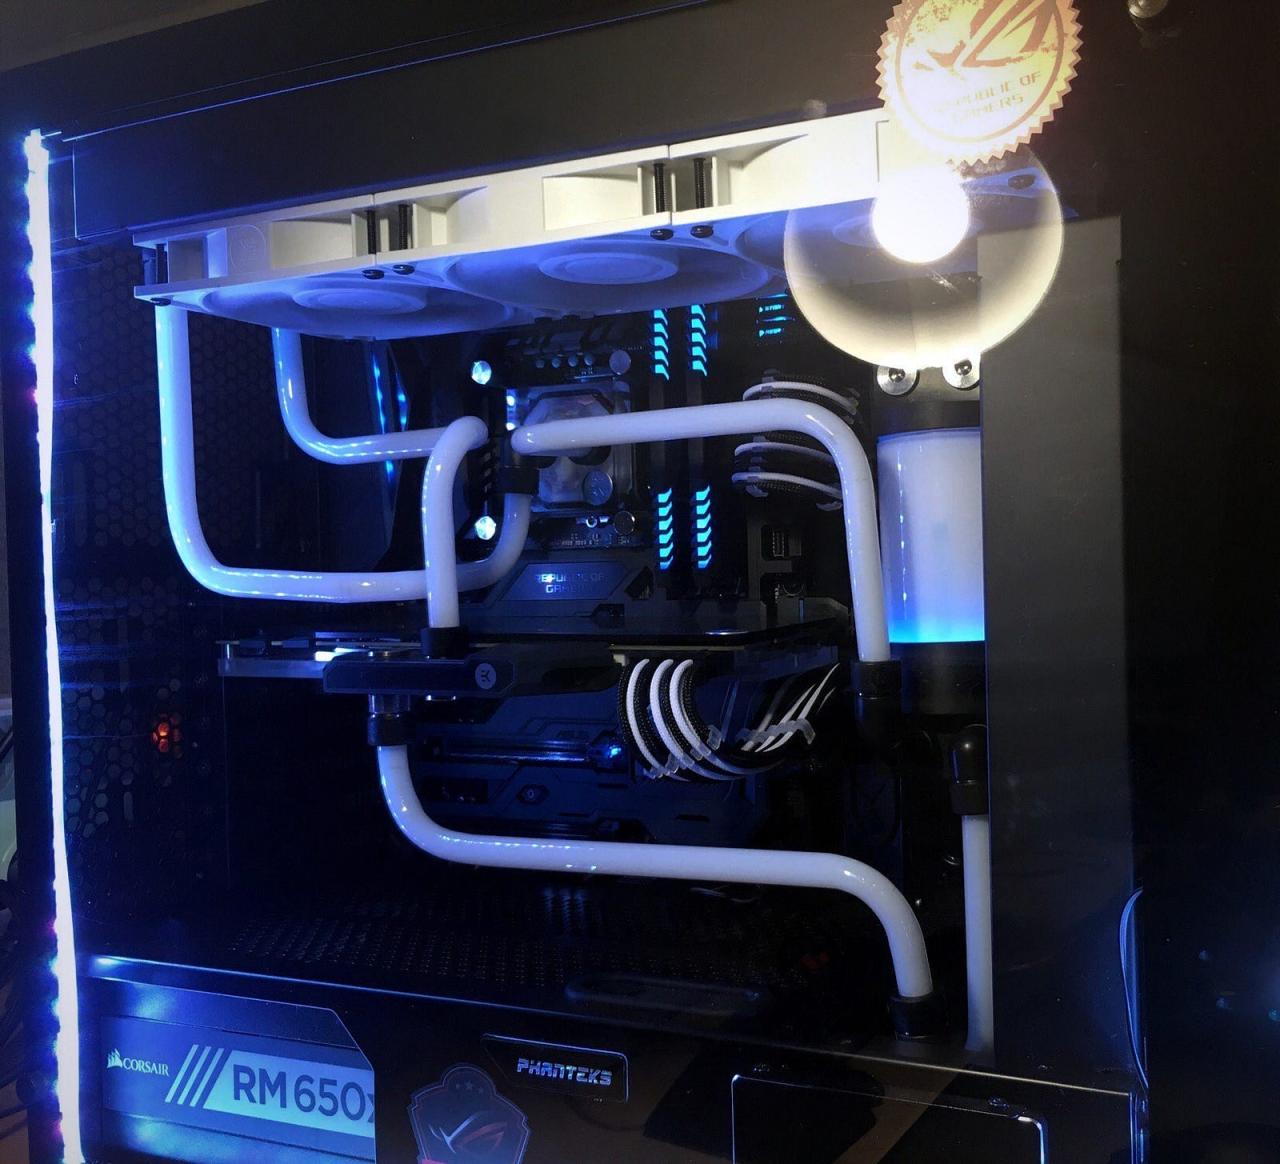 An ultimate beginners’ guide to PC water cooling James Sunderland